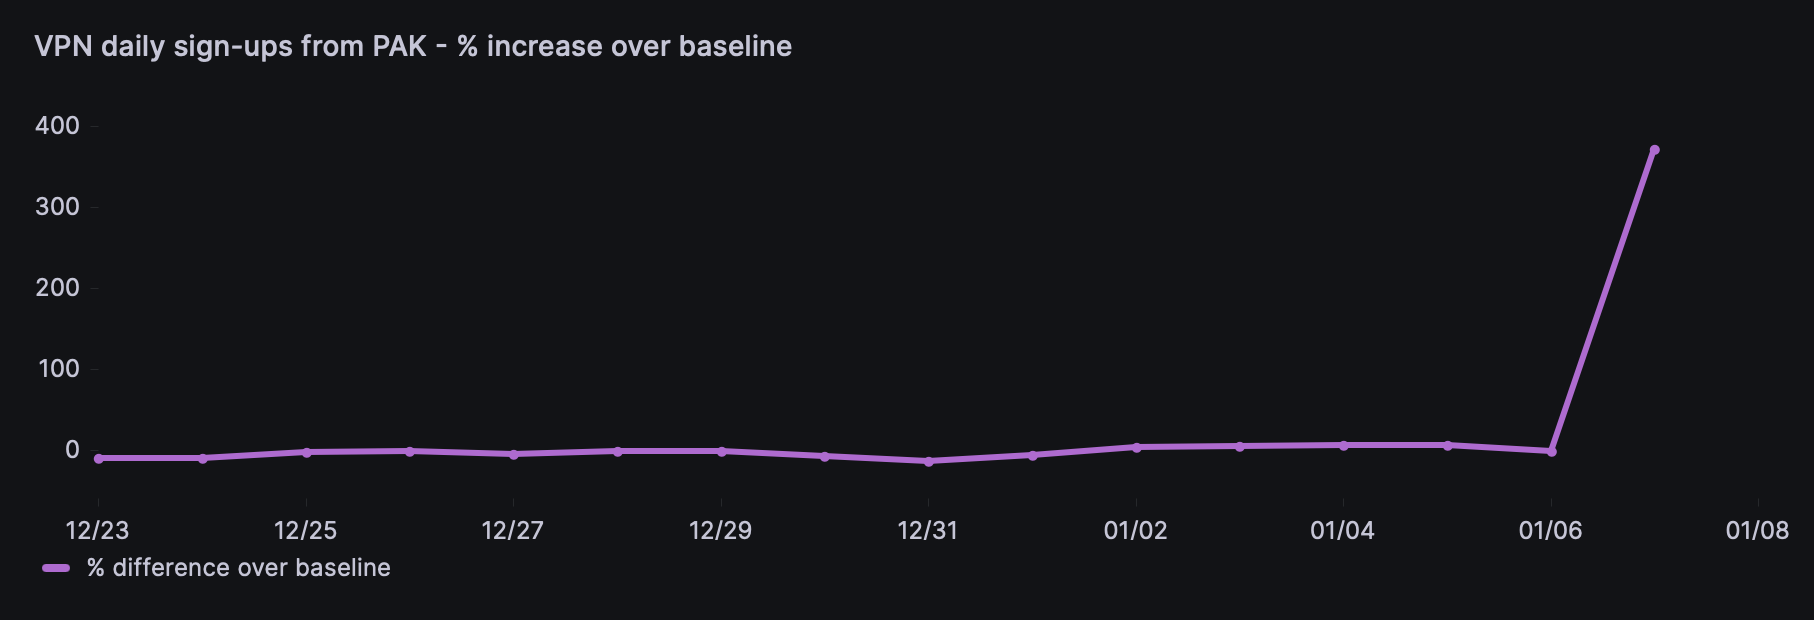 The graph shows spike in VPN downloads in Pakistan between the end of 2023 and the first week of January 2024.